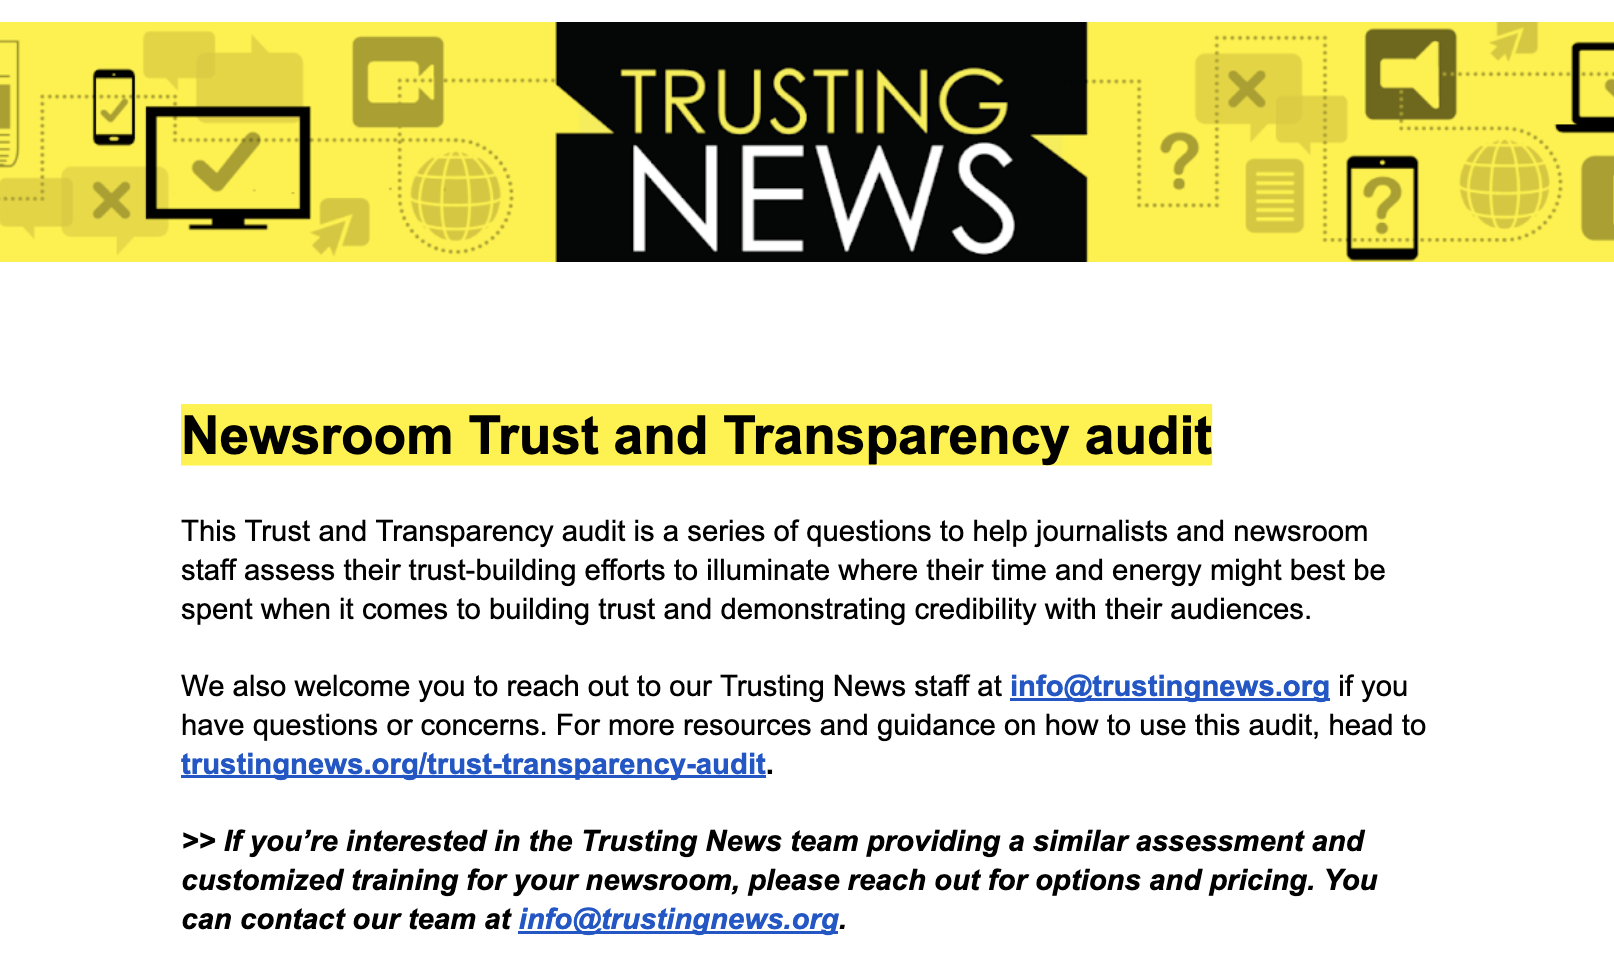 How trustworthy is your newsroom? Use this audit to find out - Trusting News